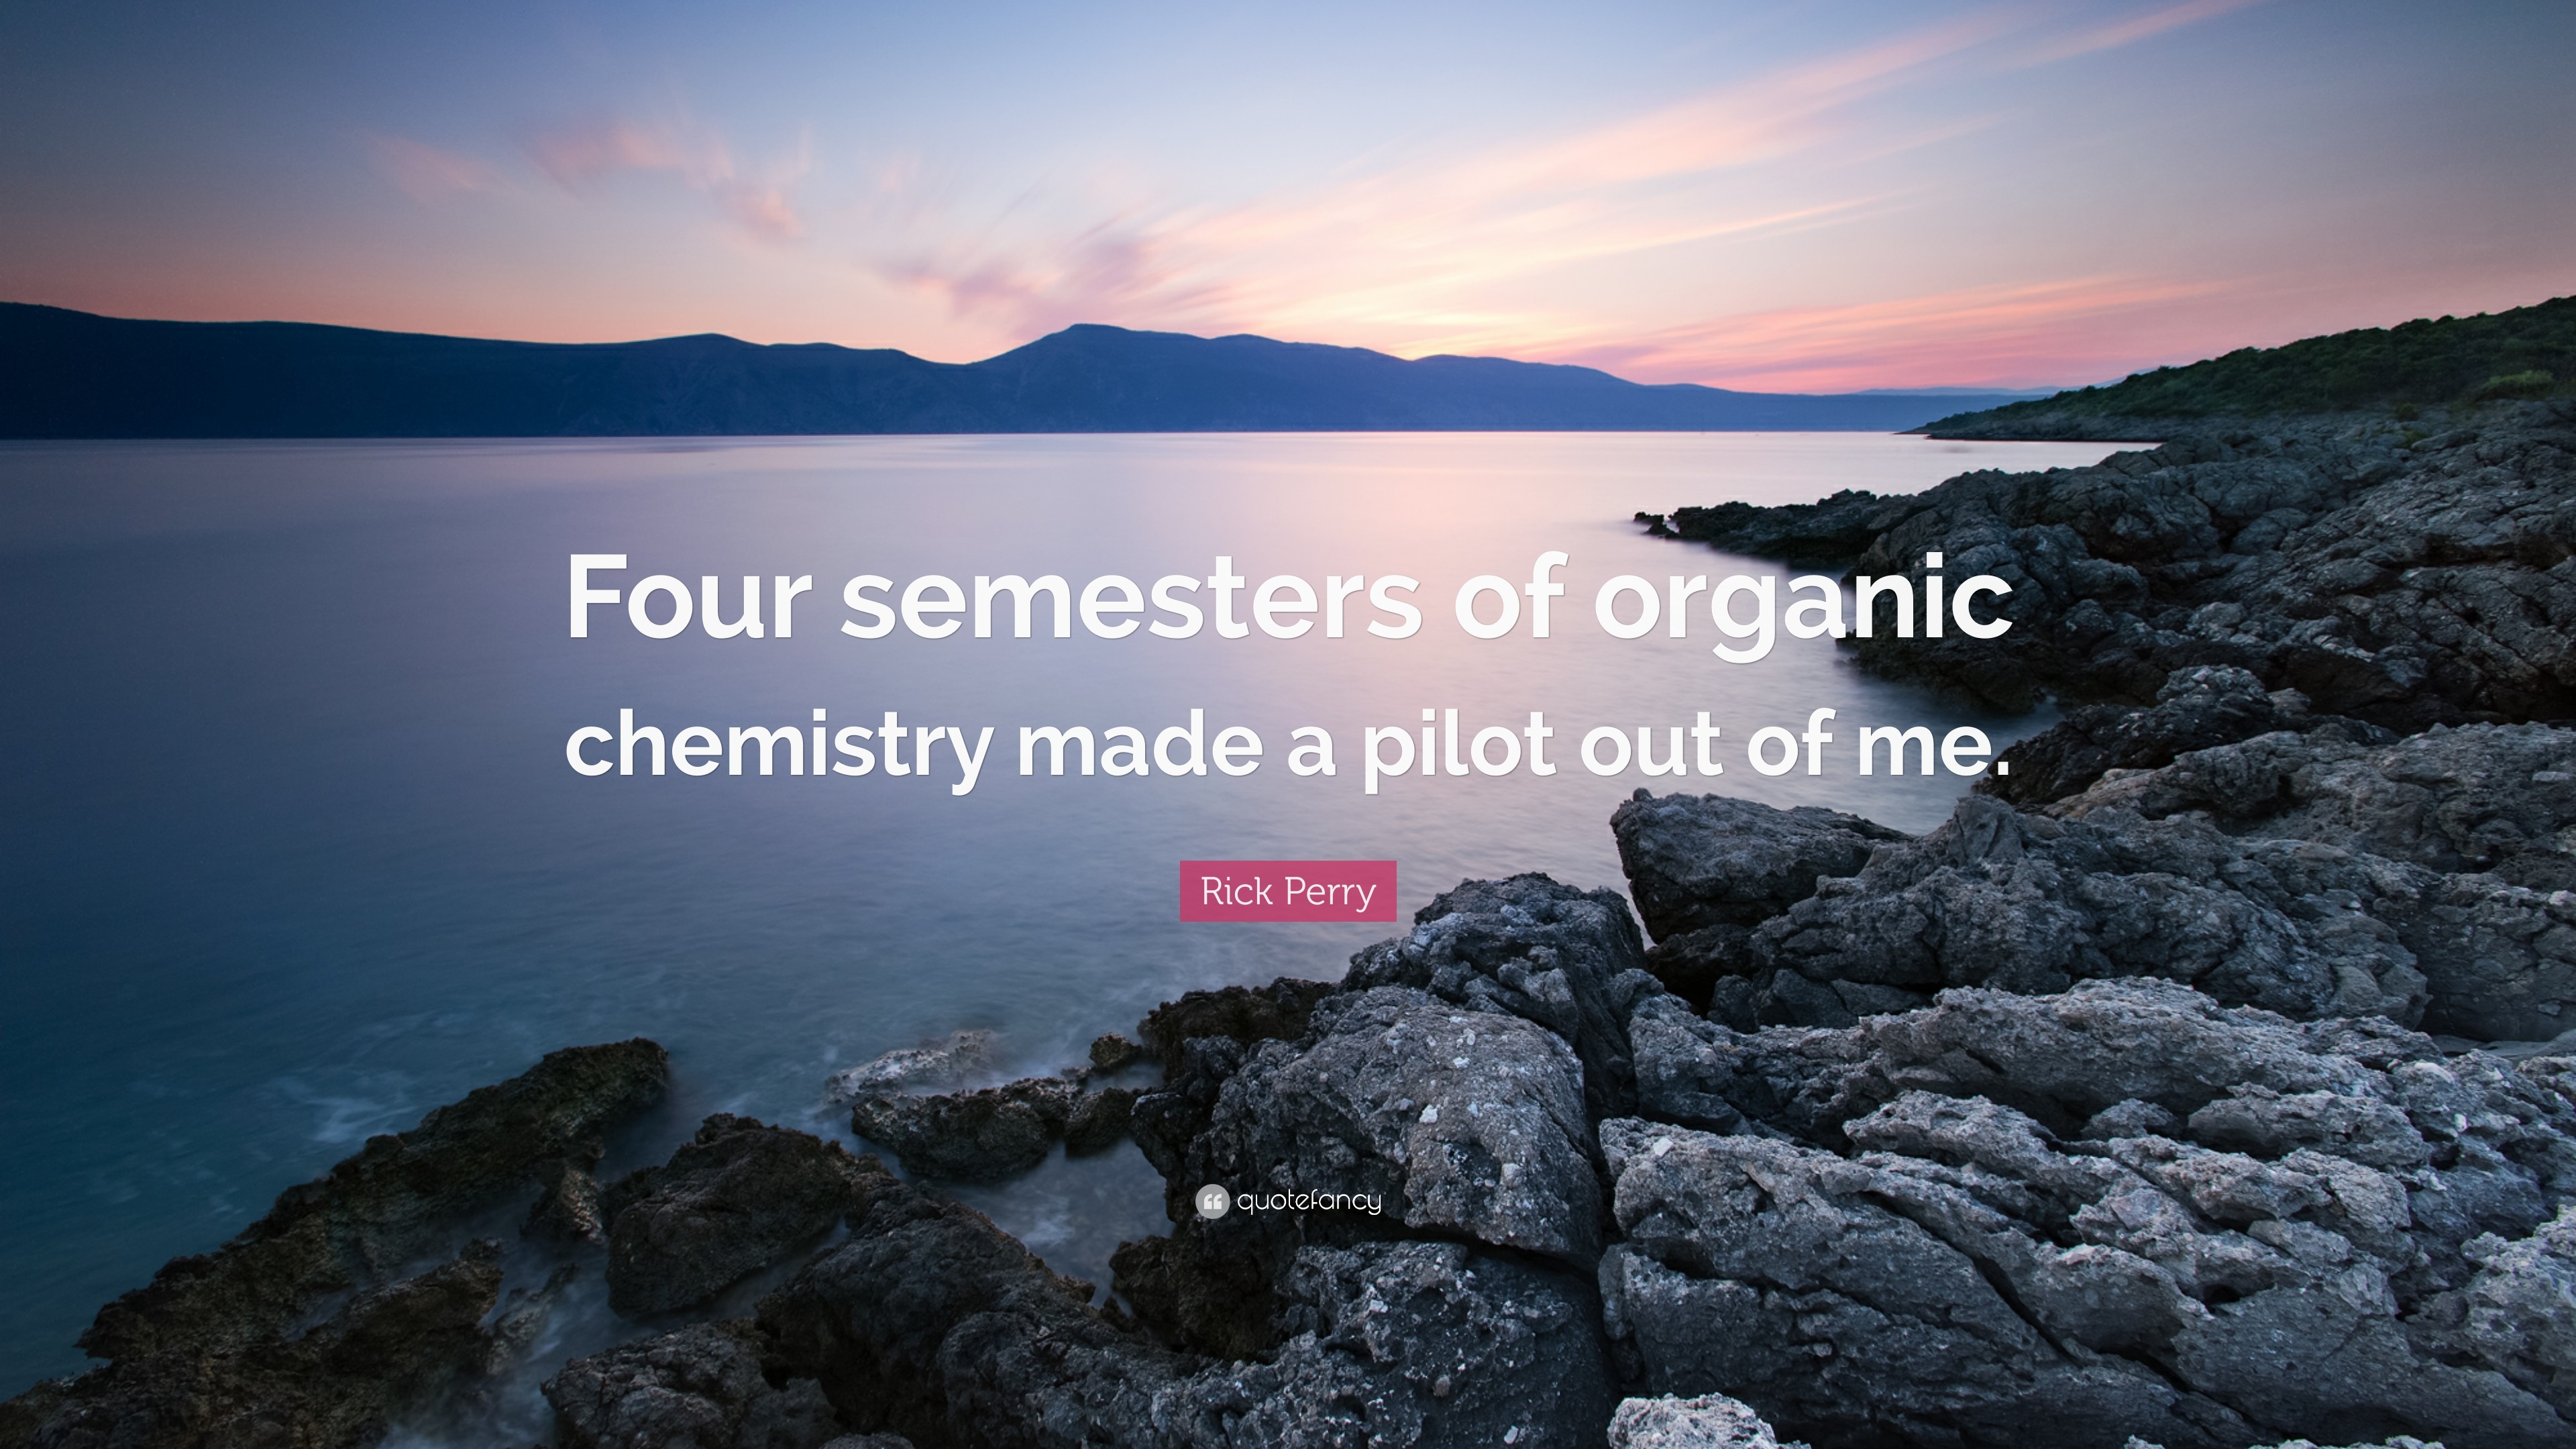 3840x2160 Rick Perry Quote: “Four semesters of organic chemistry made a pilot out of  me